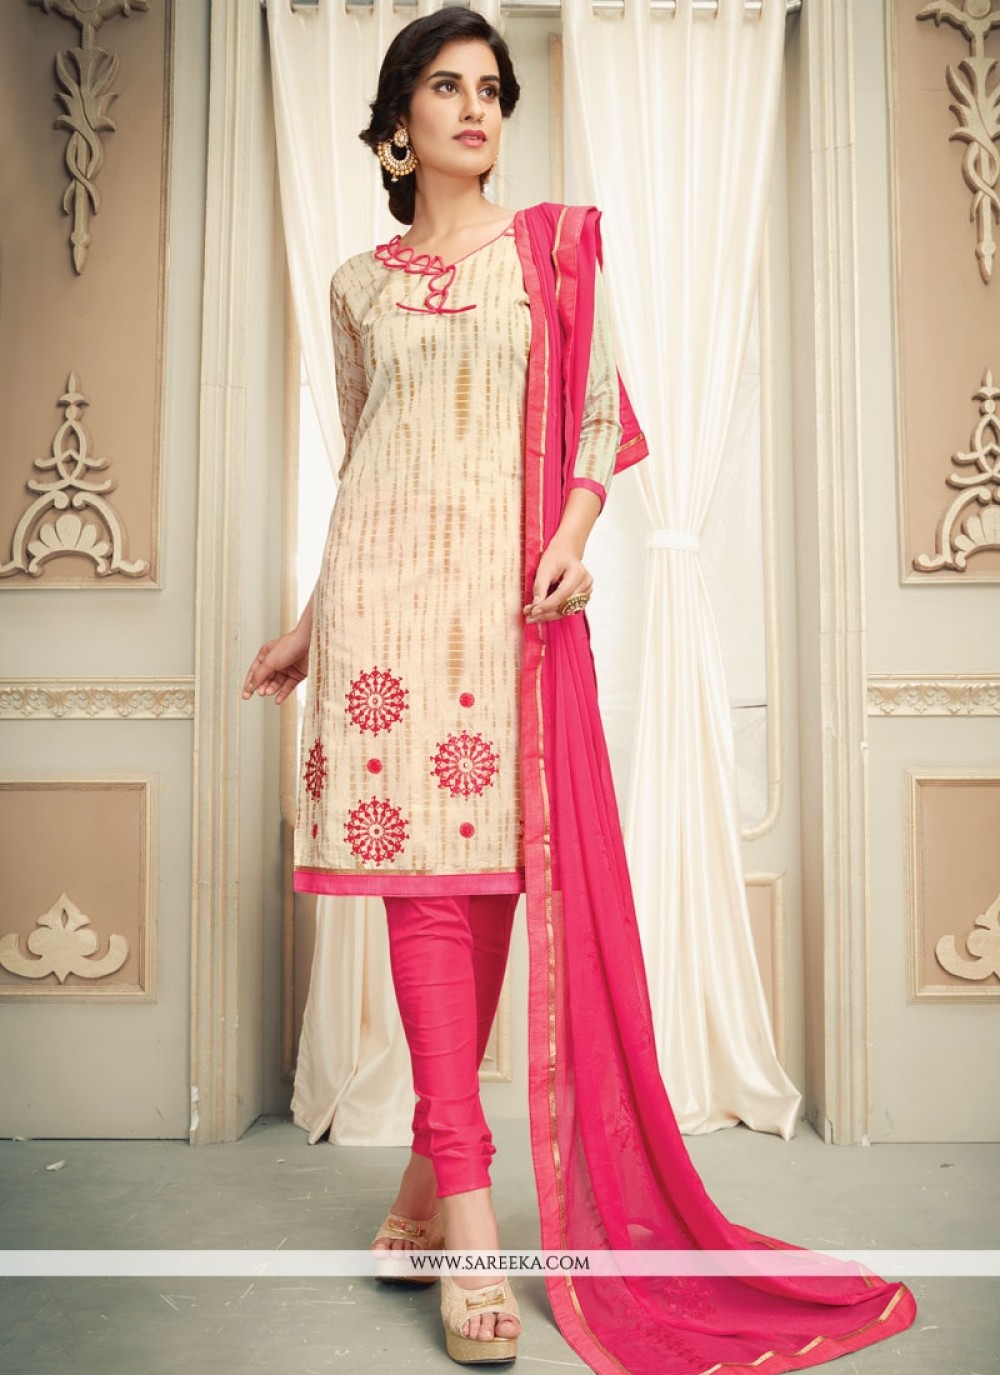 Off White and Red Salwar Kameez